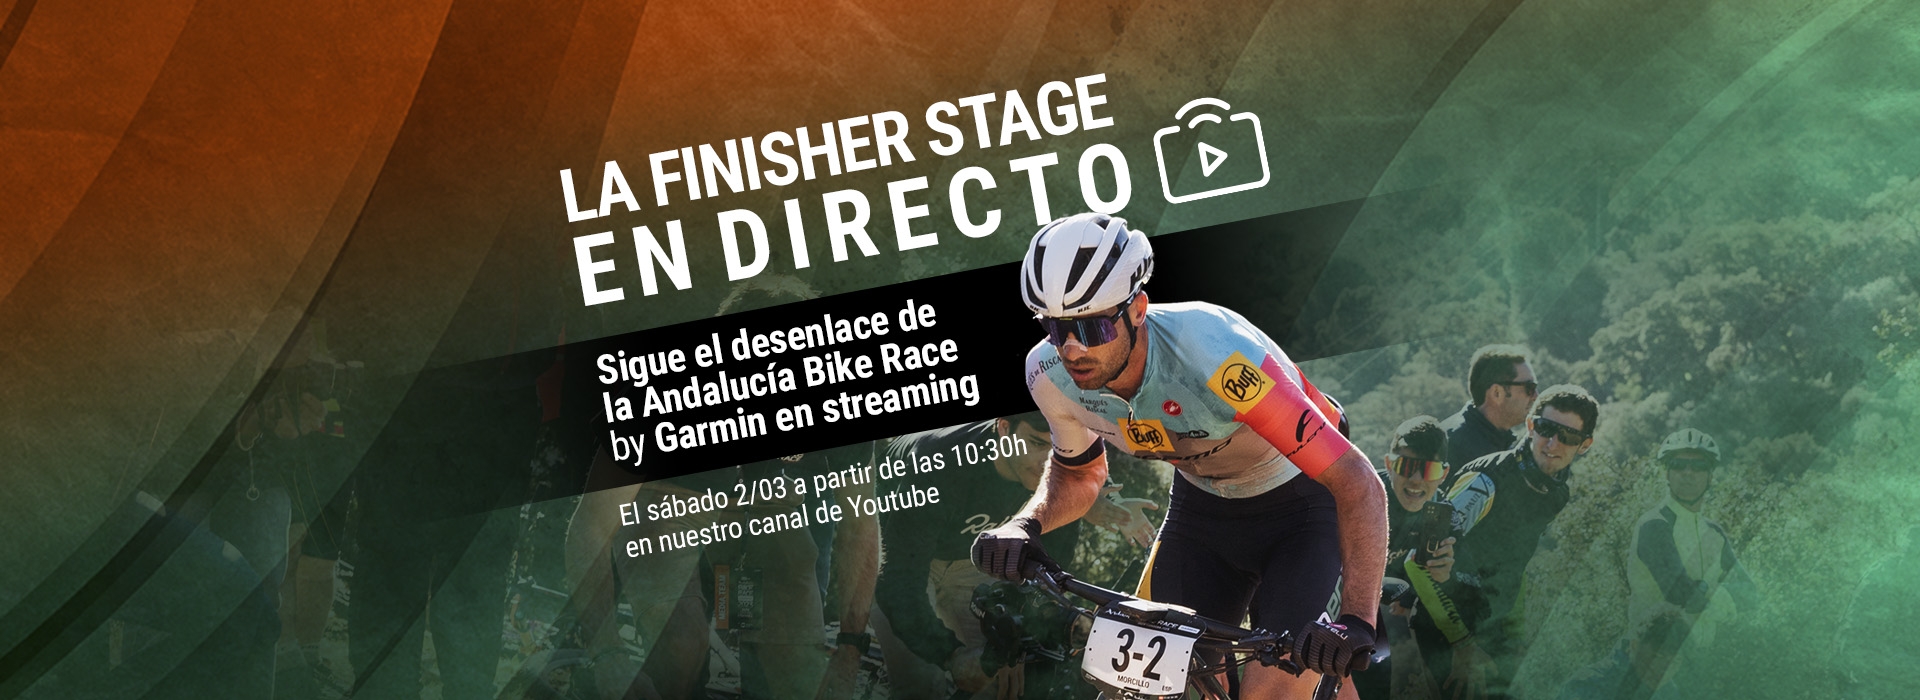 Live streaming of the Finisher Stage